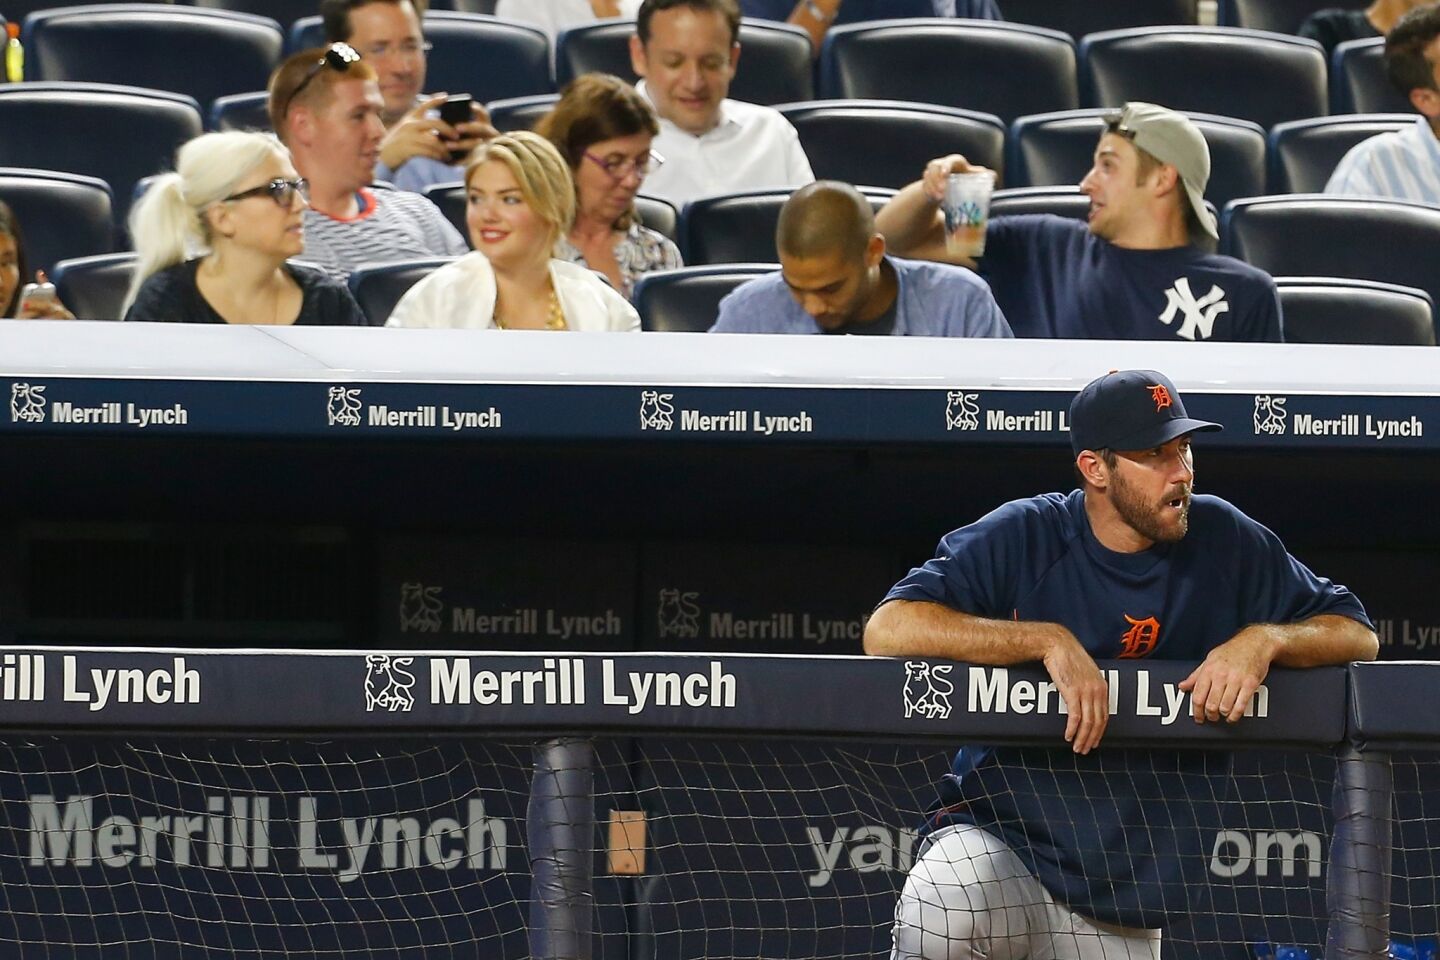 Kate Upton attends a game between the Detroit Tigers and the New York Yankees in the Bronx as her boyfriend, Justin Verlander of the Tigers, looks on from the dugout at Yankee Stadium on Aug. 4.